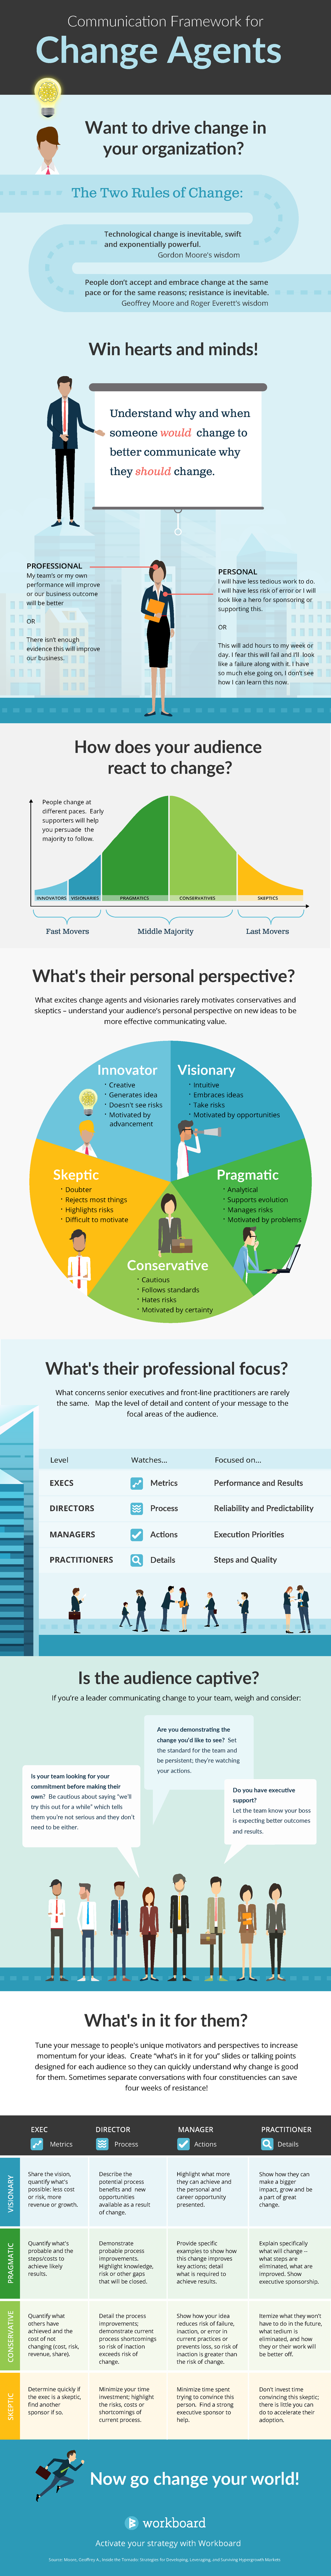 Infographic: A Communication Framework for Change Agents